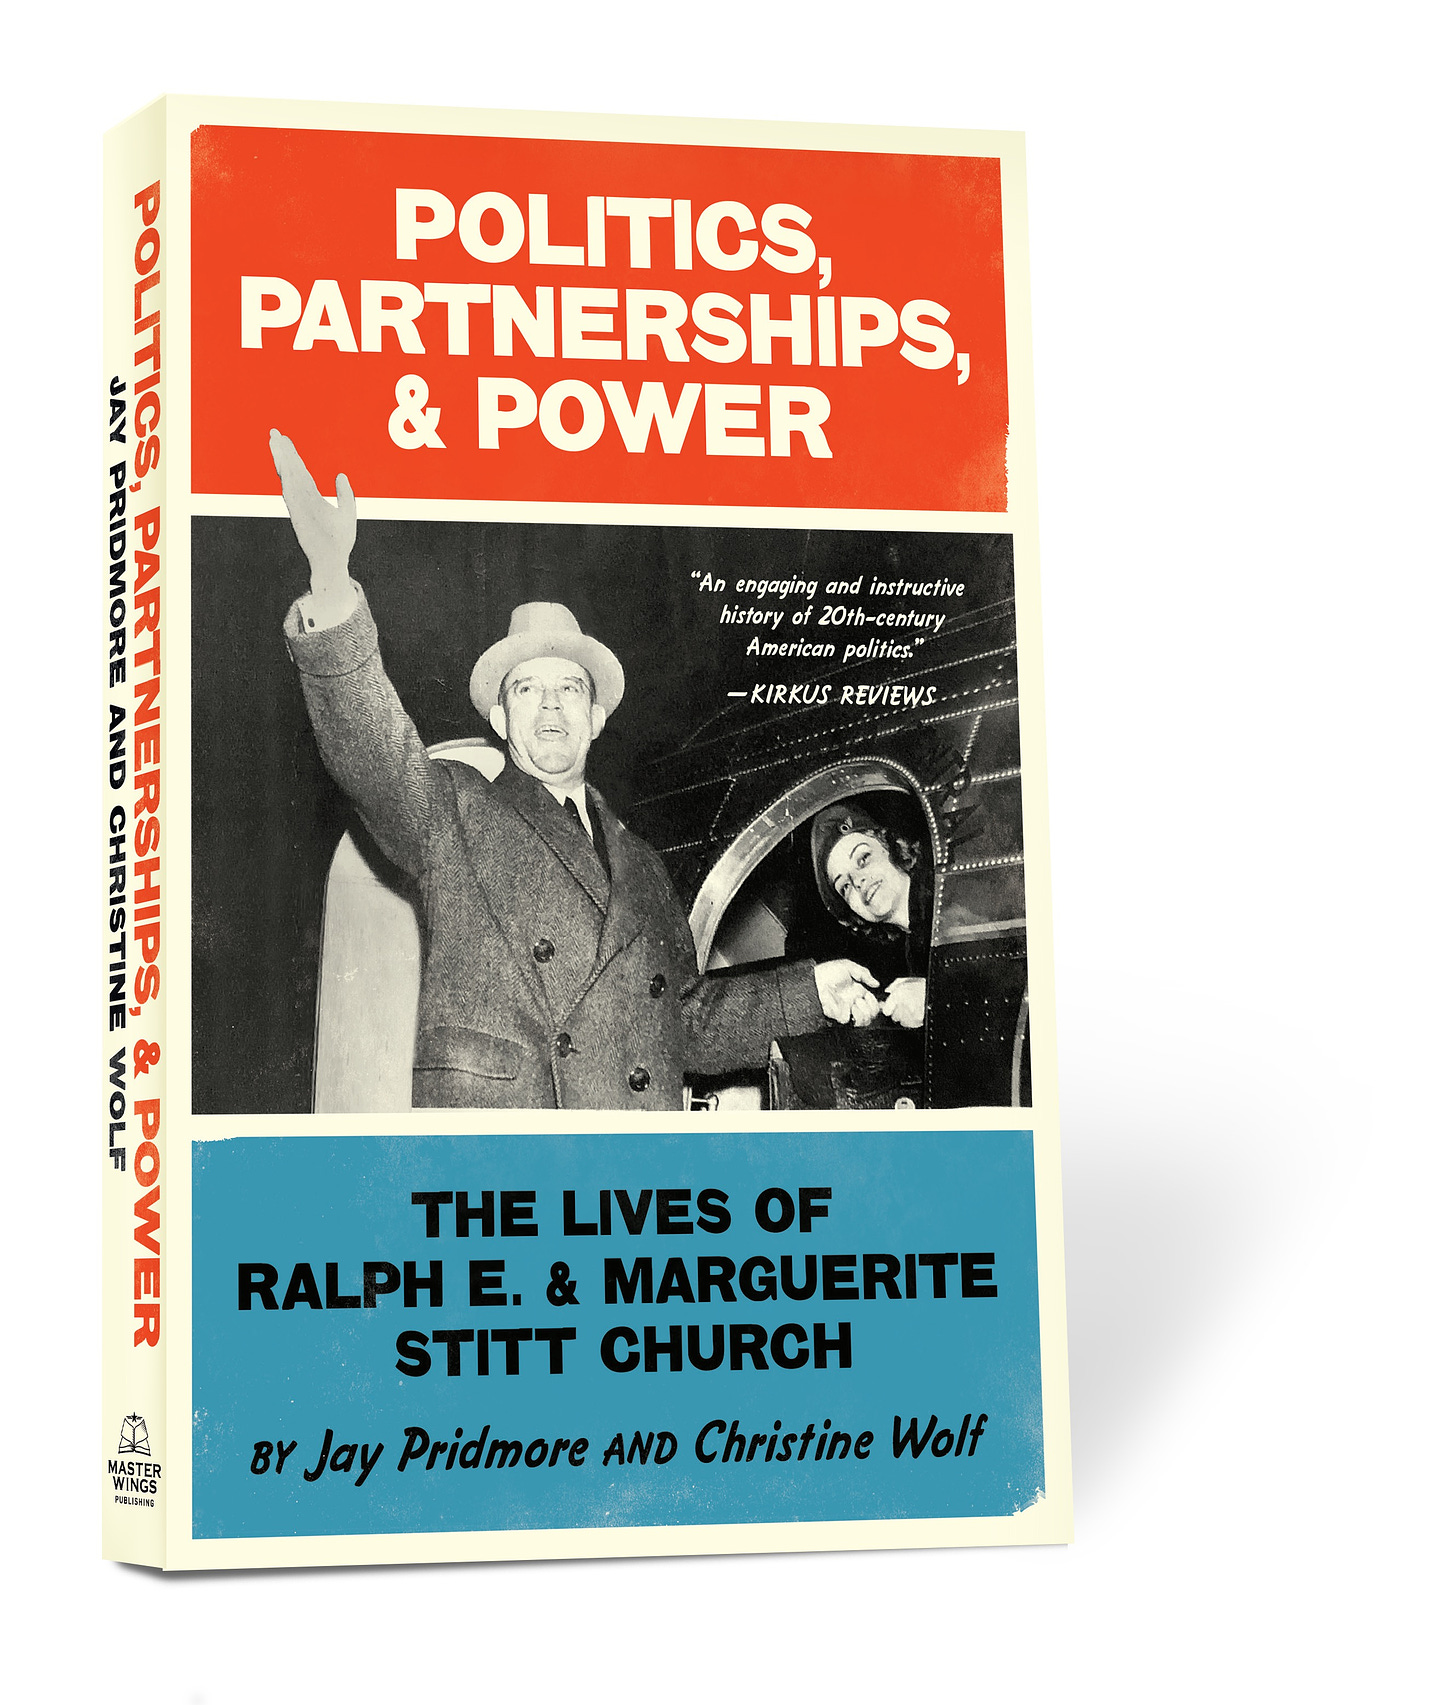 Cover photo of Politics, Partnerships, & Power: The Lives of Ralph E. and Marguerite Stitt Church, co-written by Jay Pridmore and memoir writing coach Christine Wolf